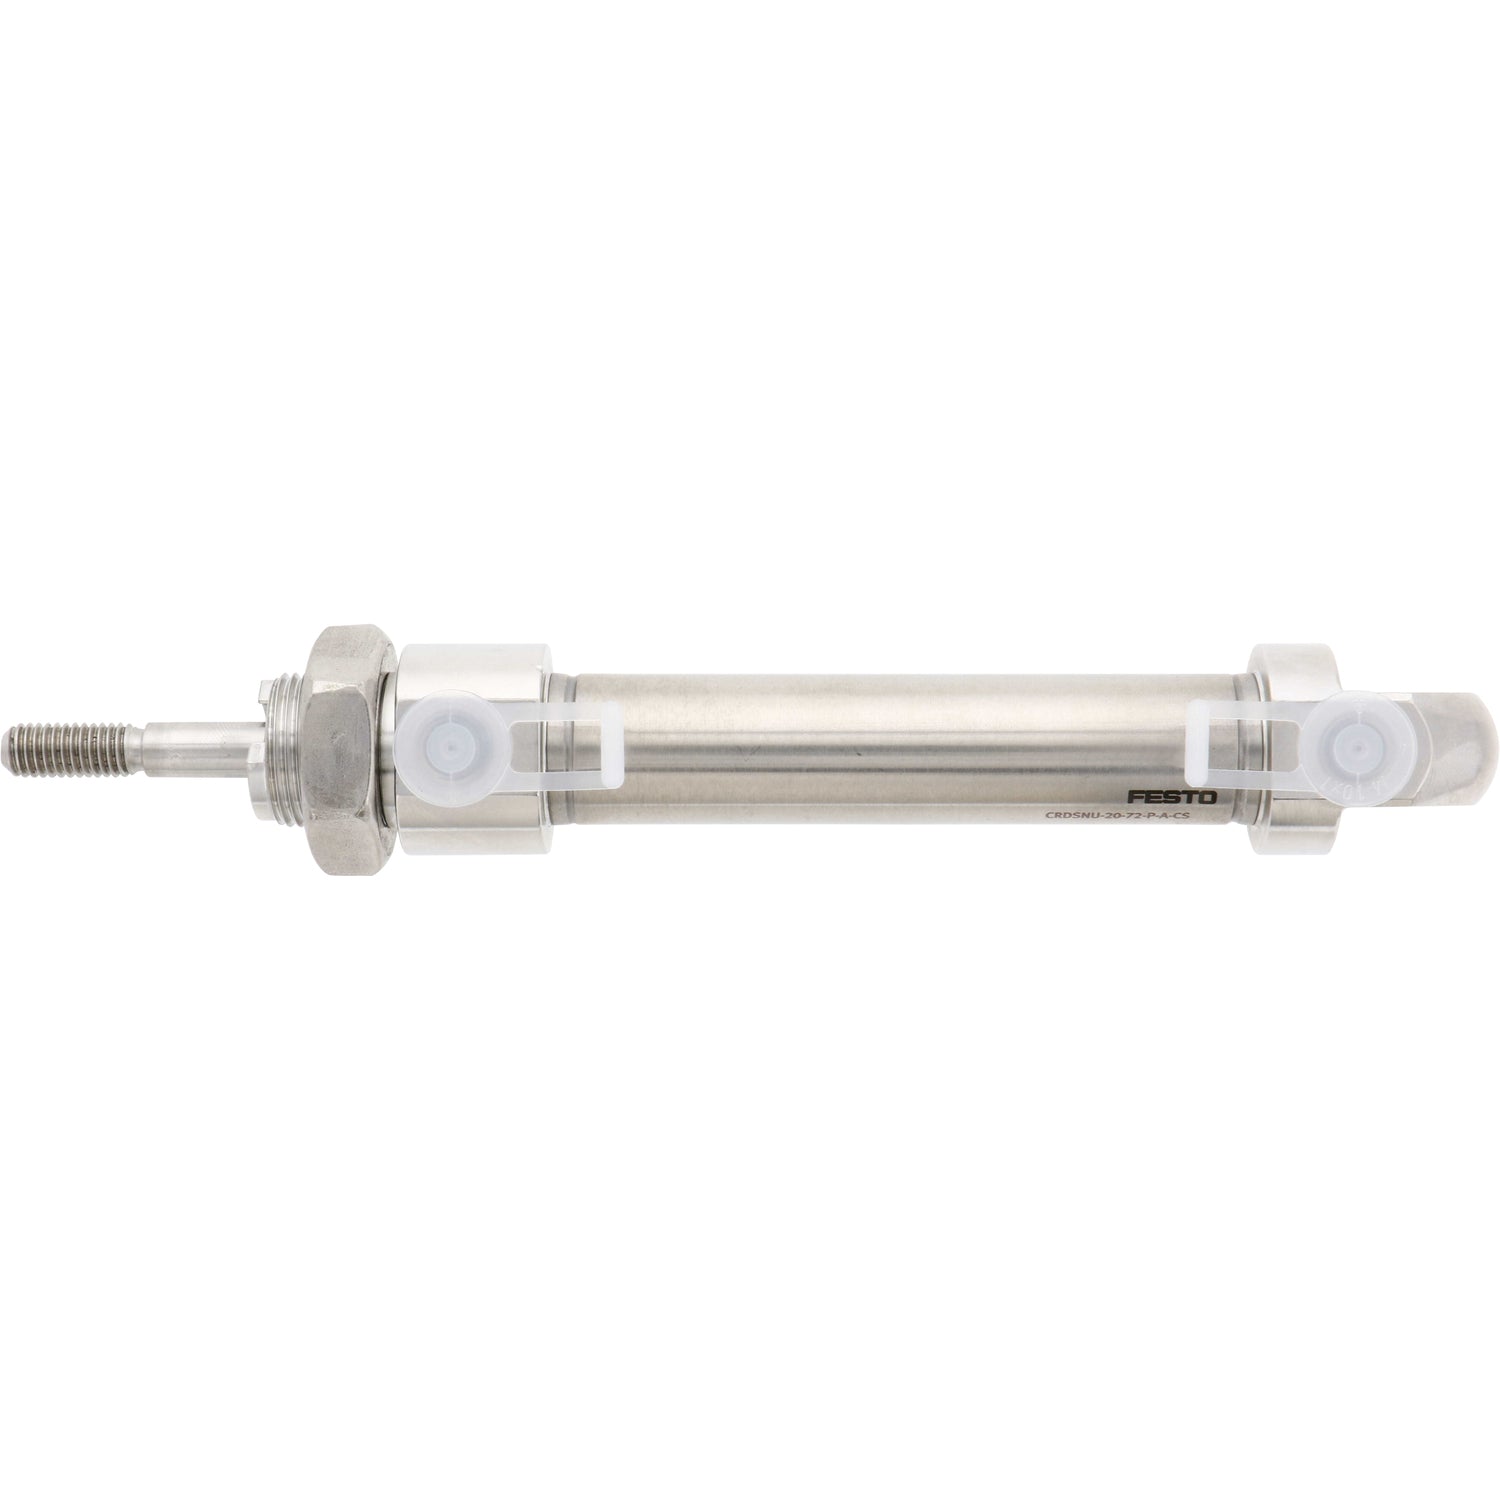 Stainless-steel , cylindrical pneumatic cylinder with white plastic plugs pressed into threaded holes. Cylinder is shown on a white background. 13111349